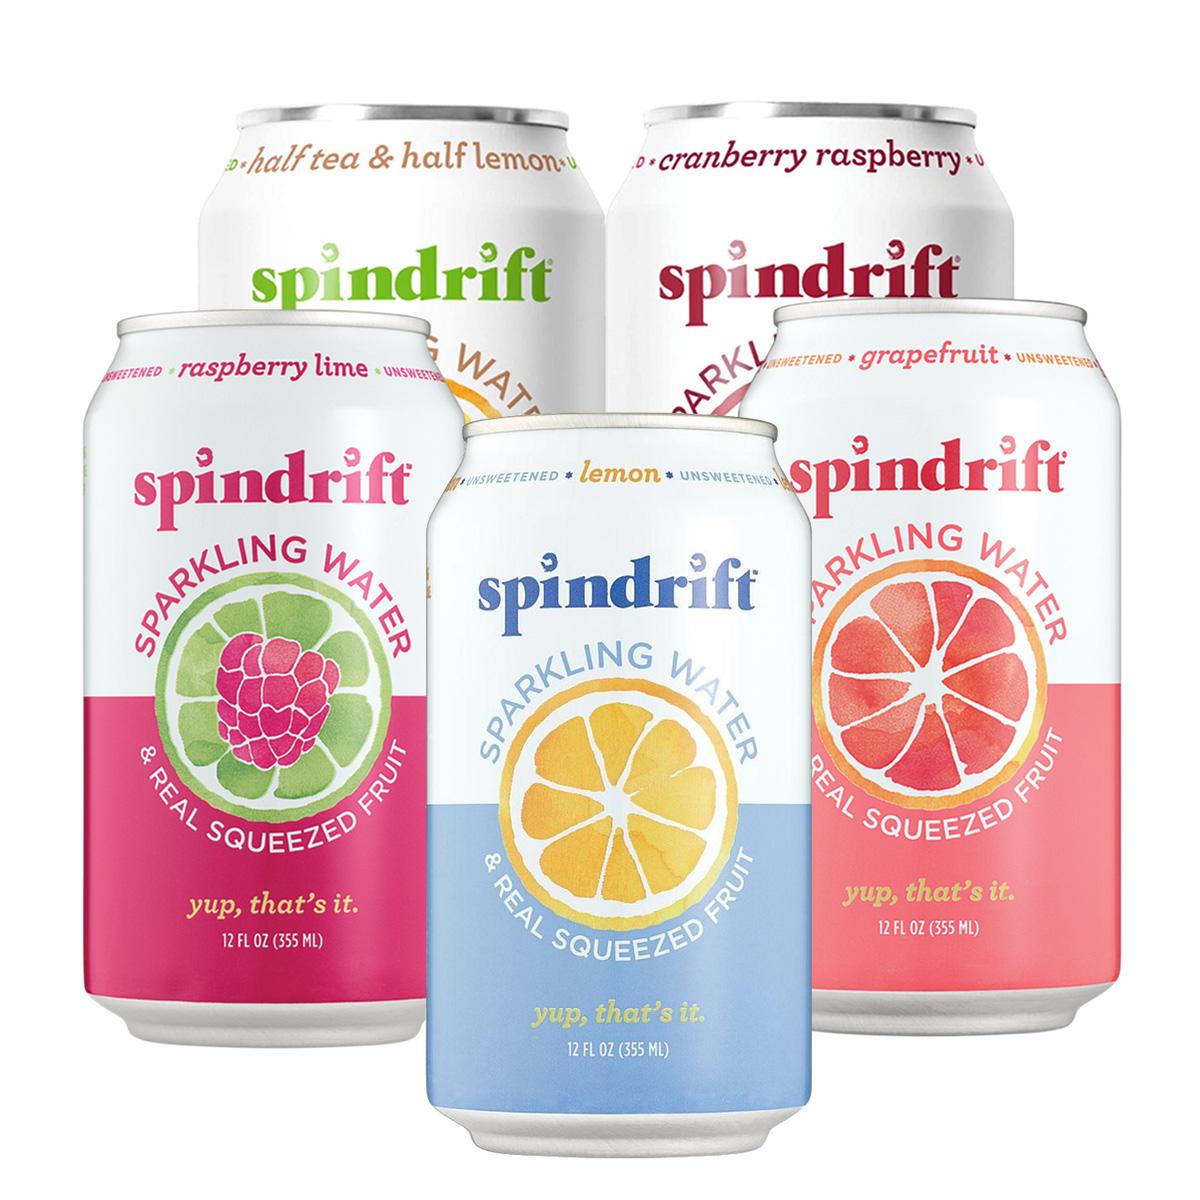 24 Spindrift Flavored Sparkling Water for $11.98